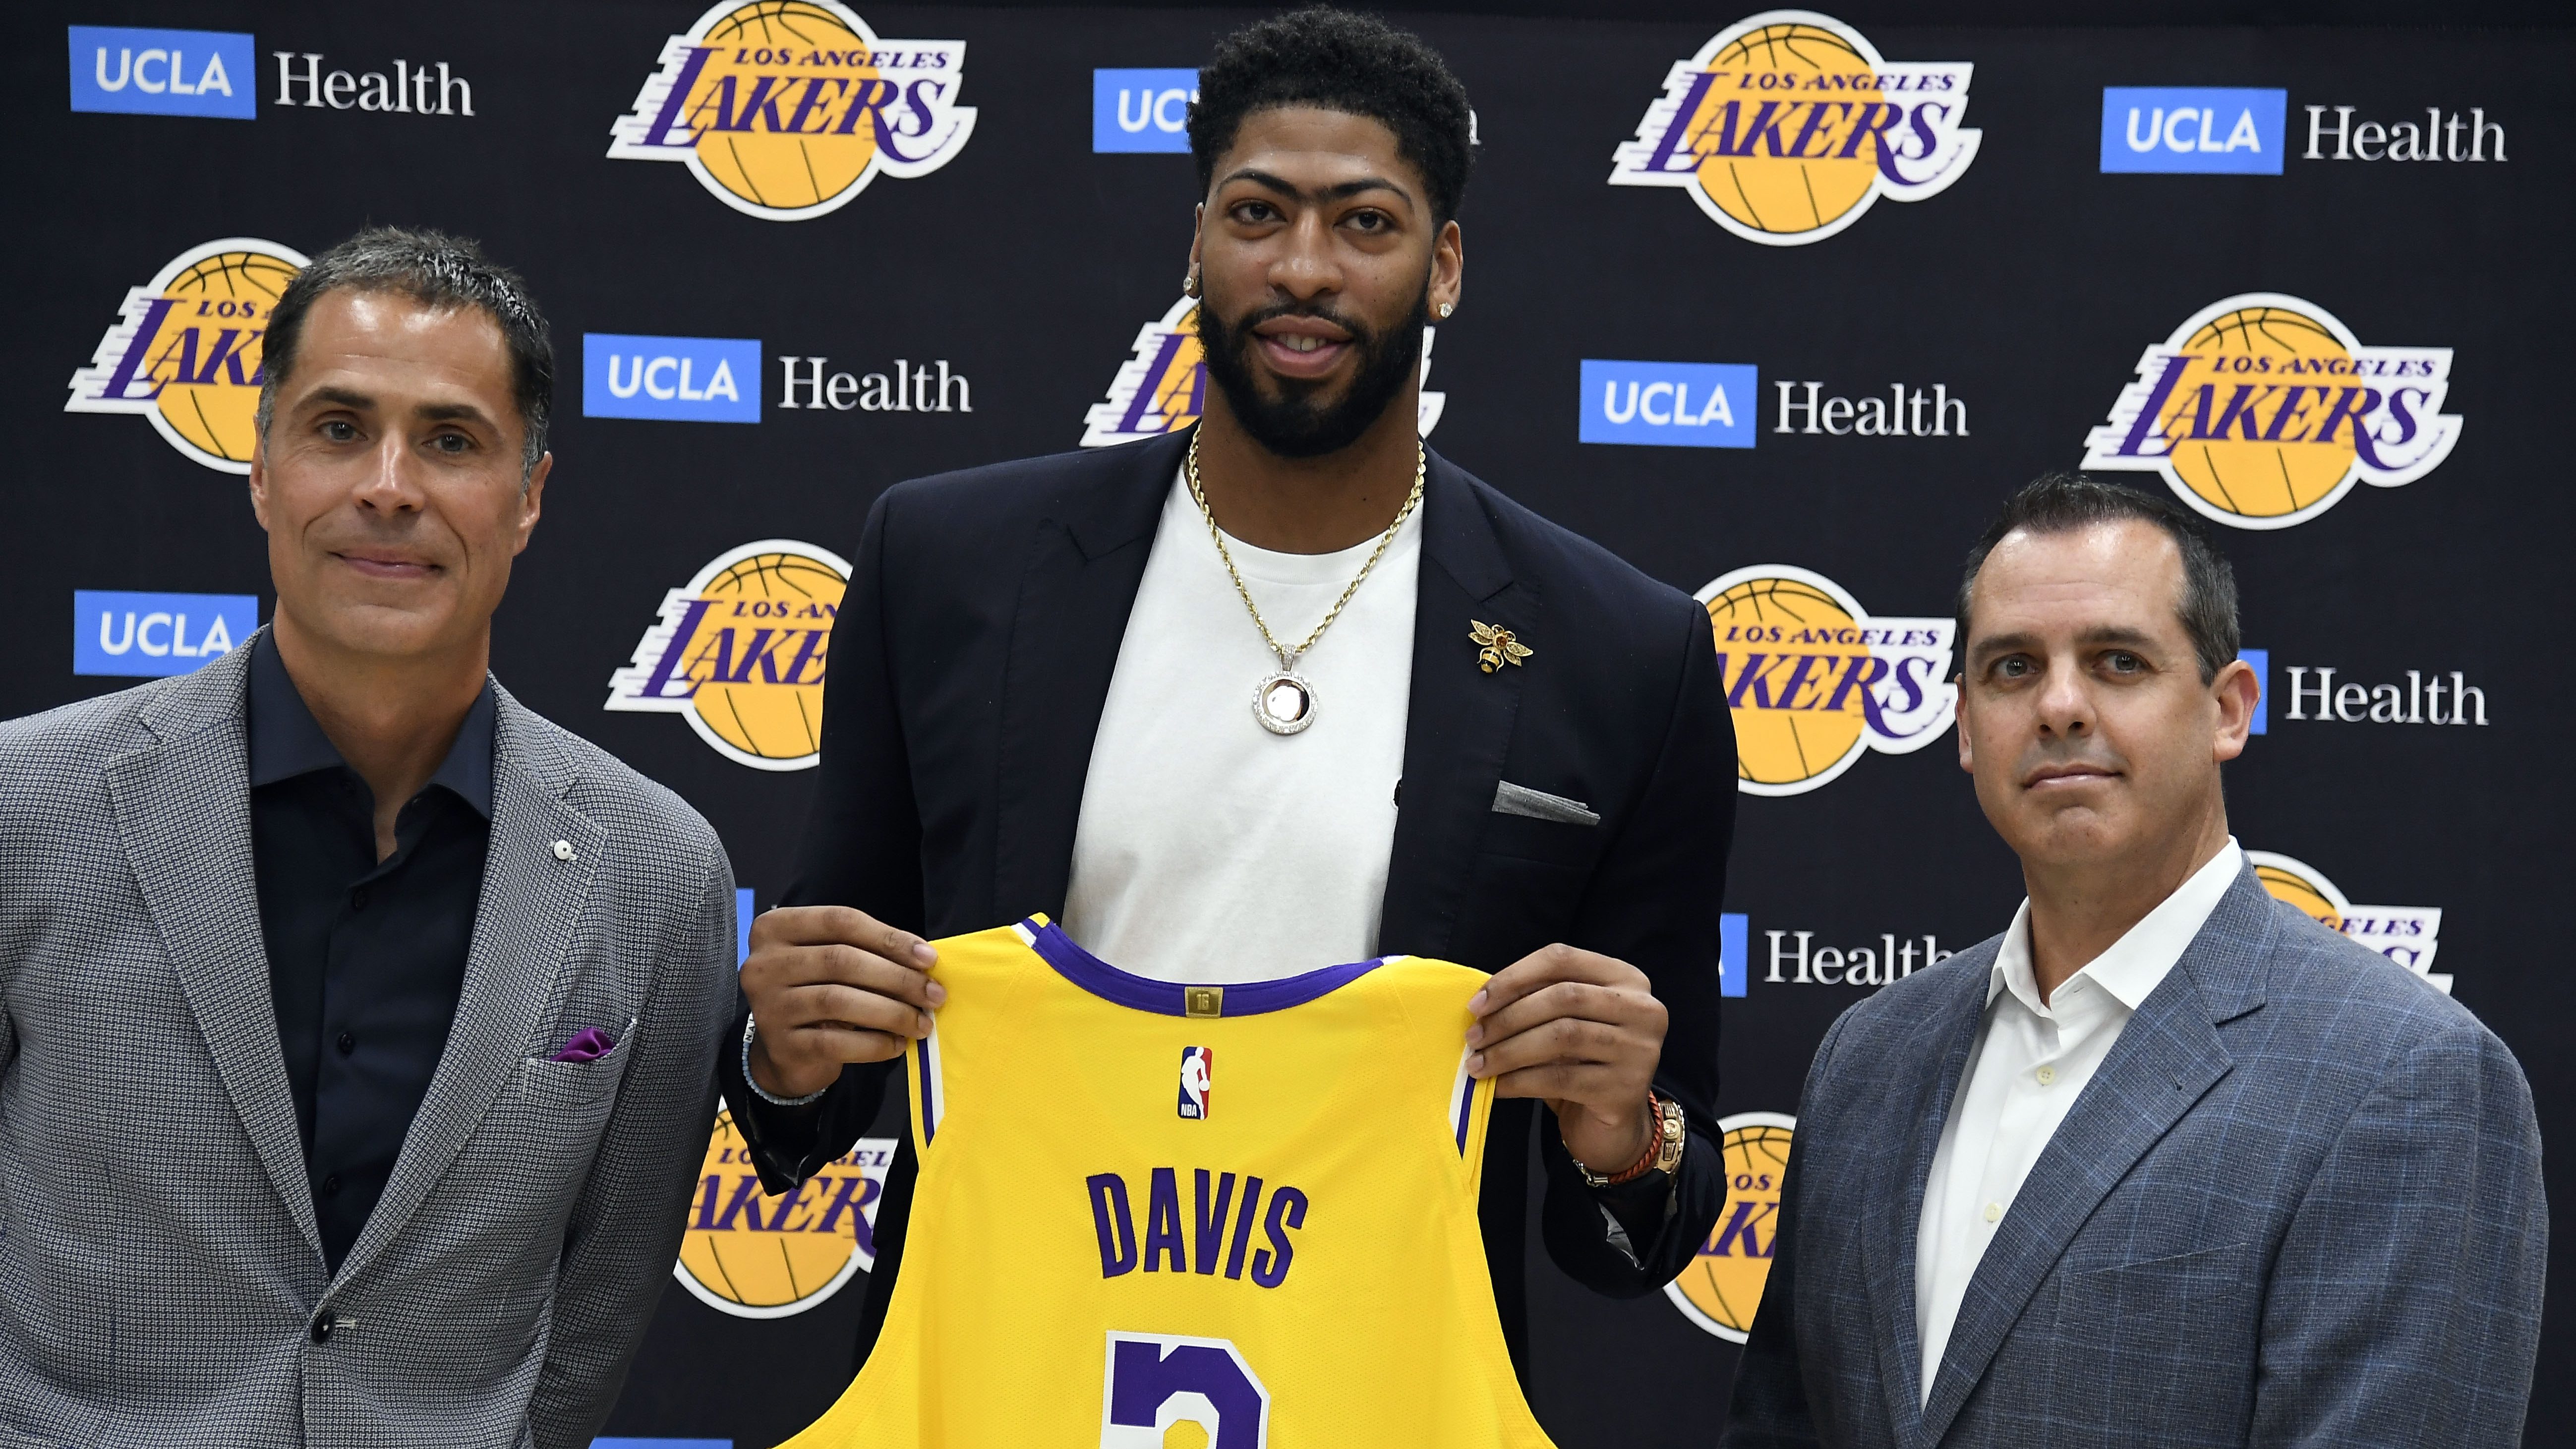 ad on lakers jersey